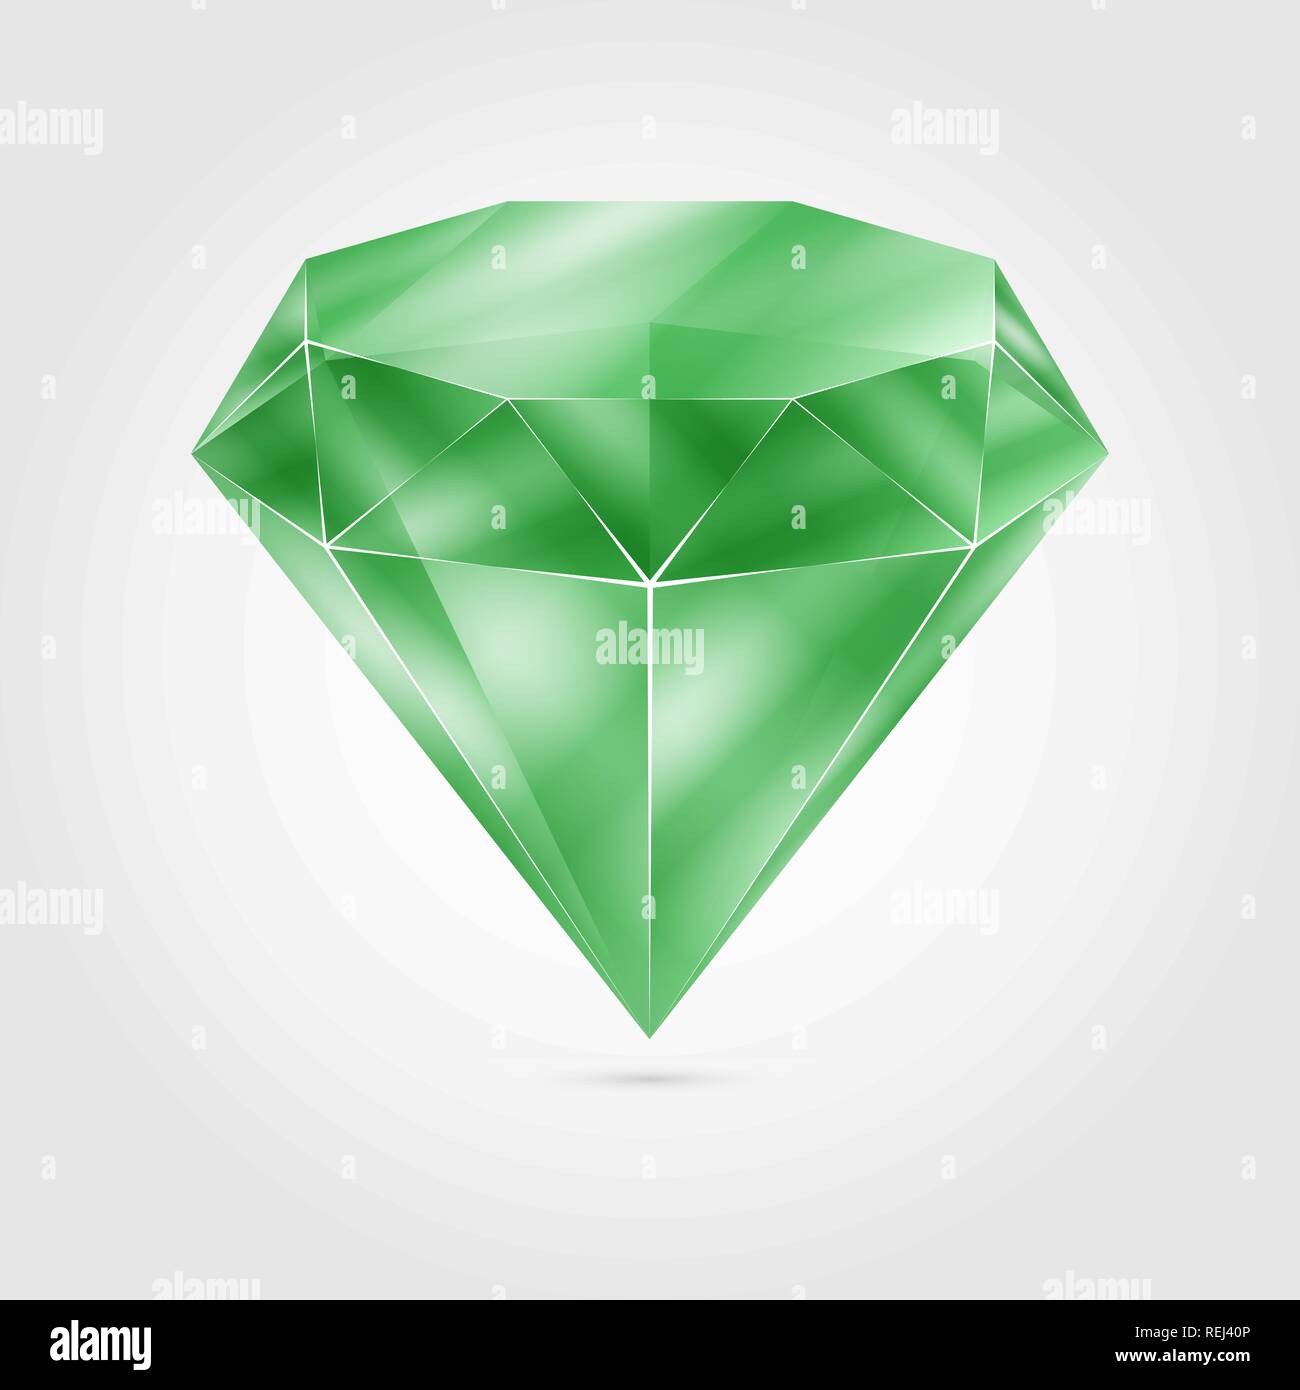 Realistic green round gem - emerald. Colorful gemstone that can be used as part of logo, icon, web decor or other design. Vector illustration, EPS10. Stock Vector